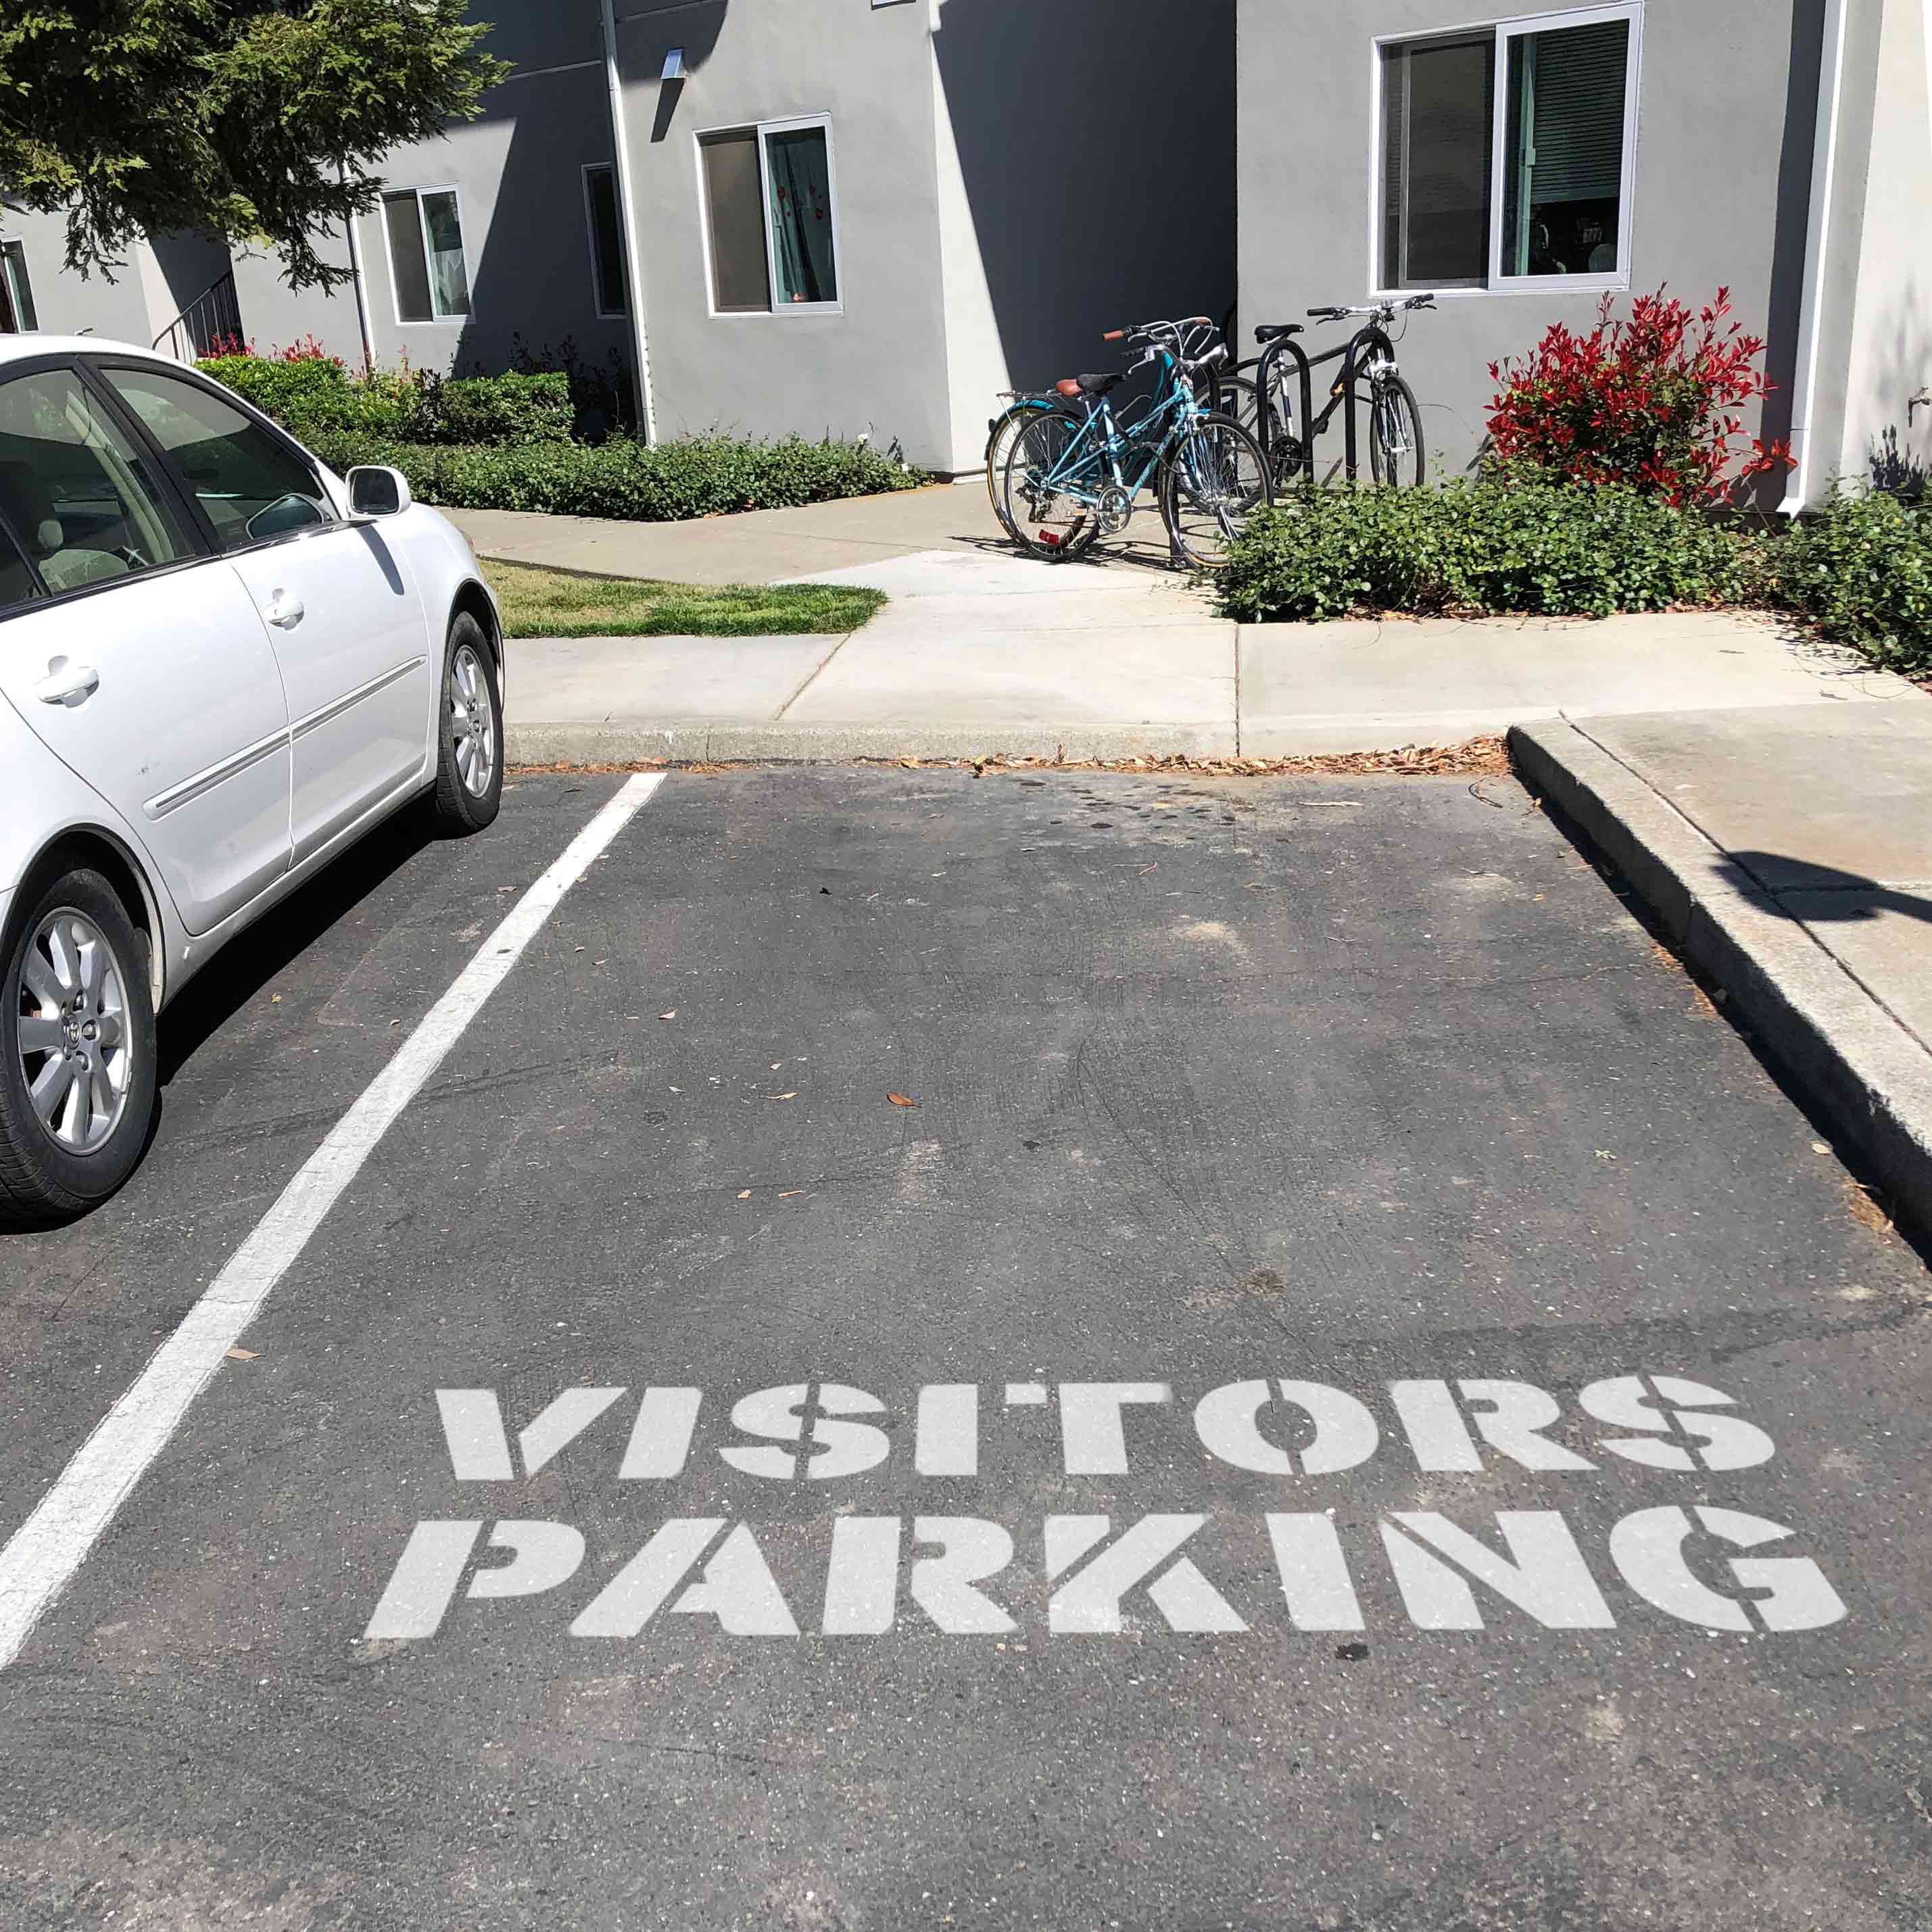 Large Stencil Painted on Parking Space